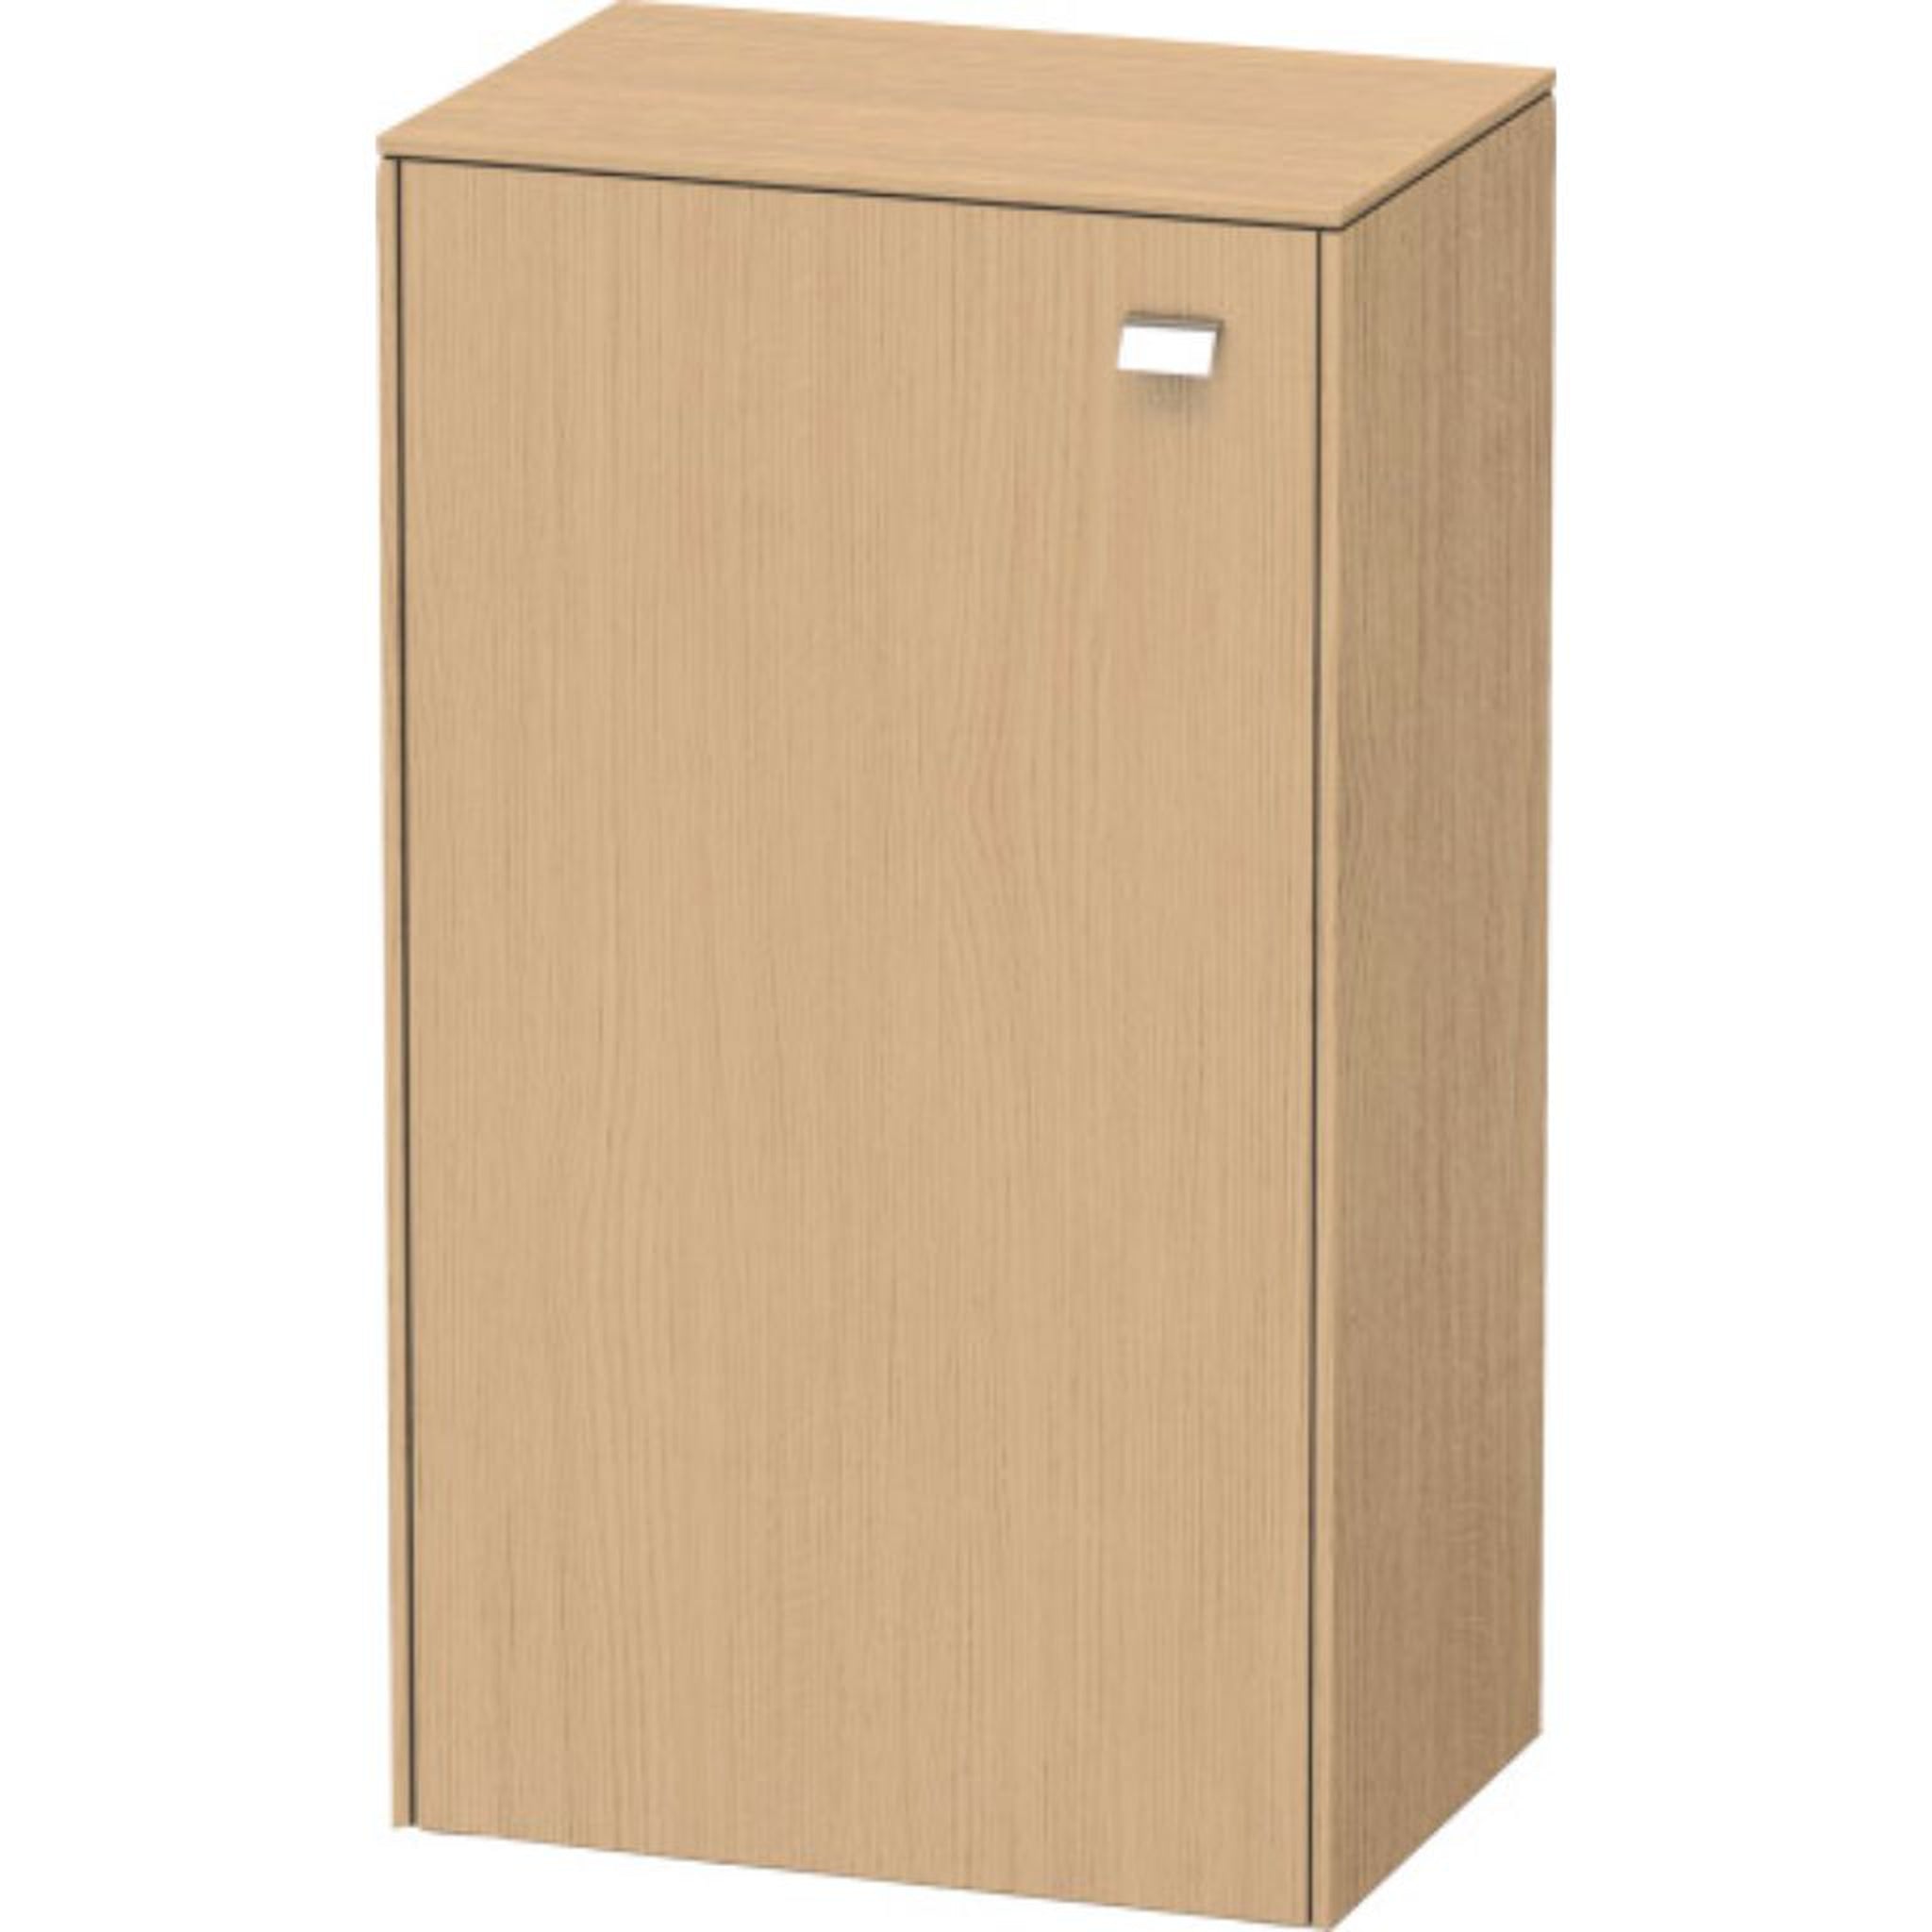 Duravit, Duravit Brioso 20" x 36" x 14" Semi Tall Cabinet With Left Door in Natural Oak and Chrome Handle